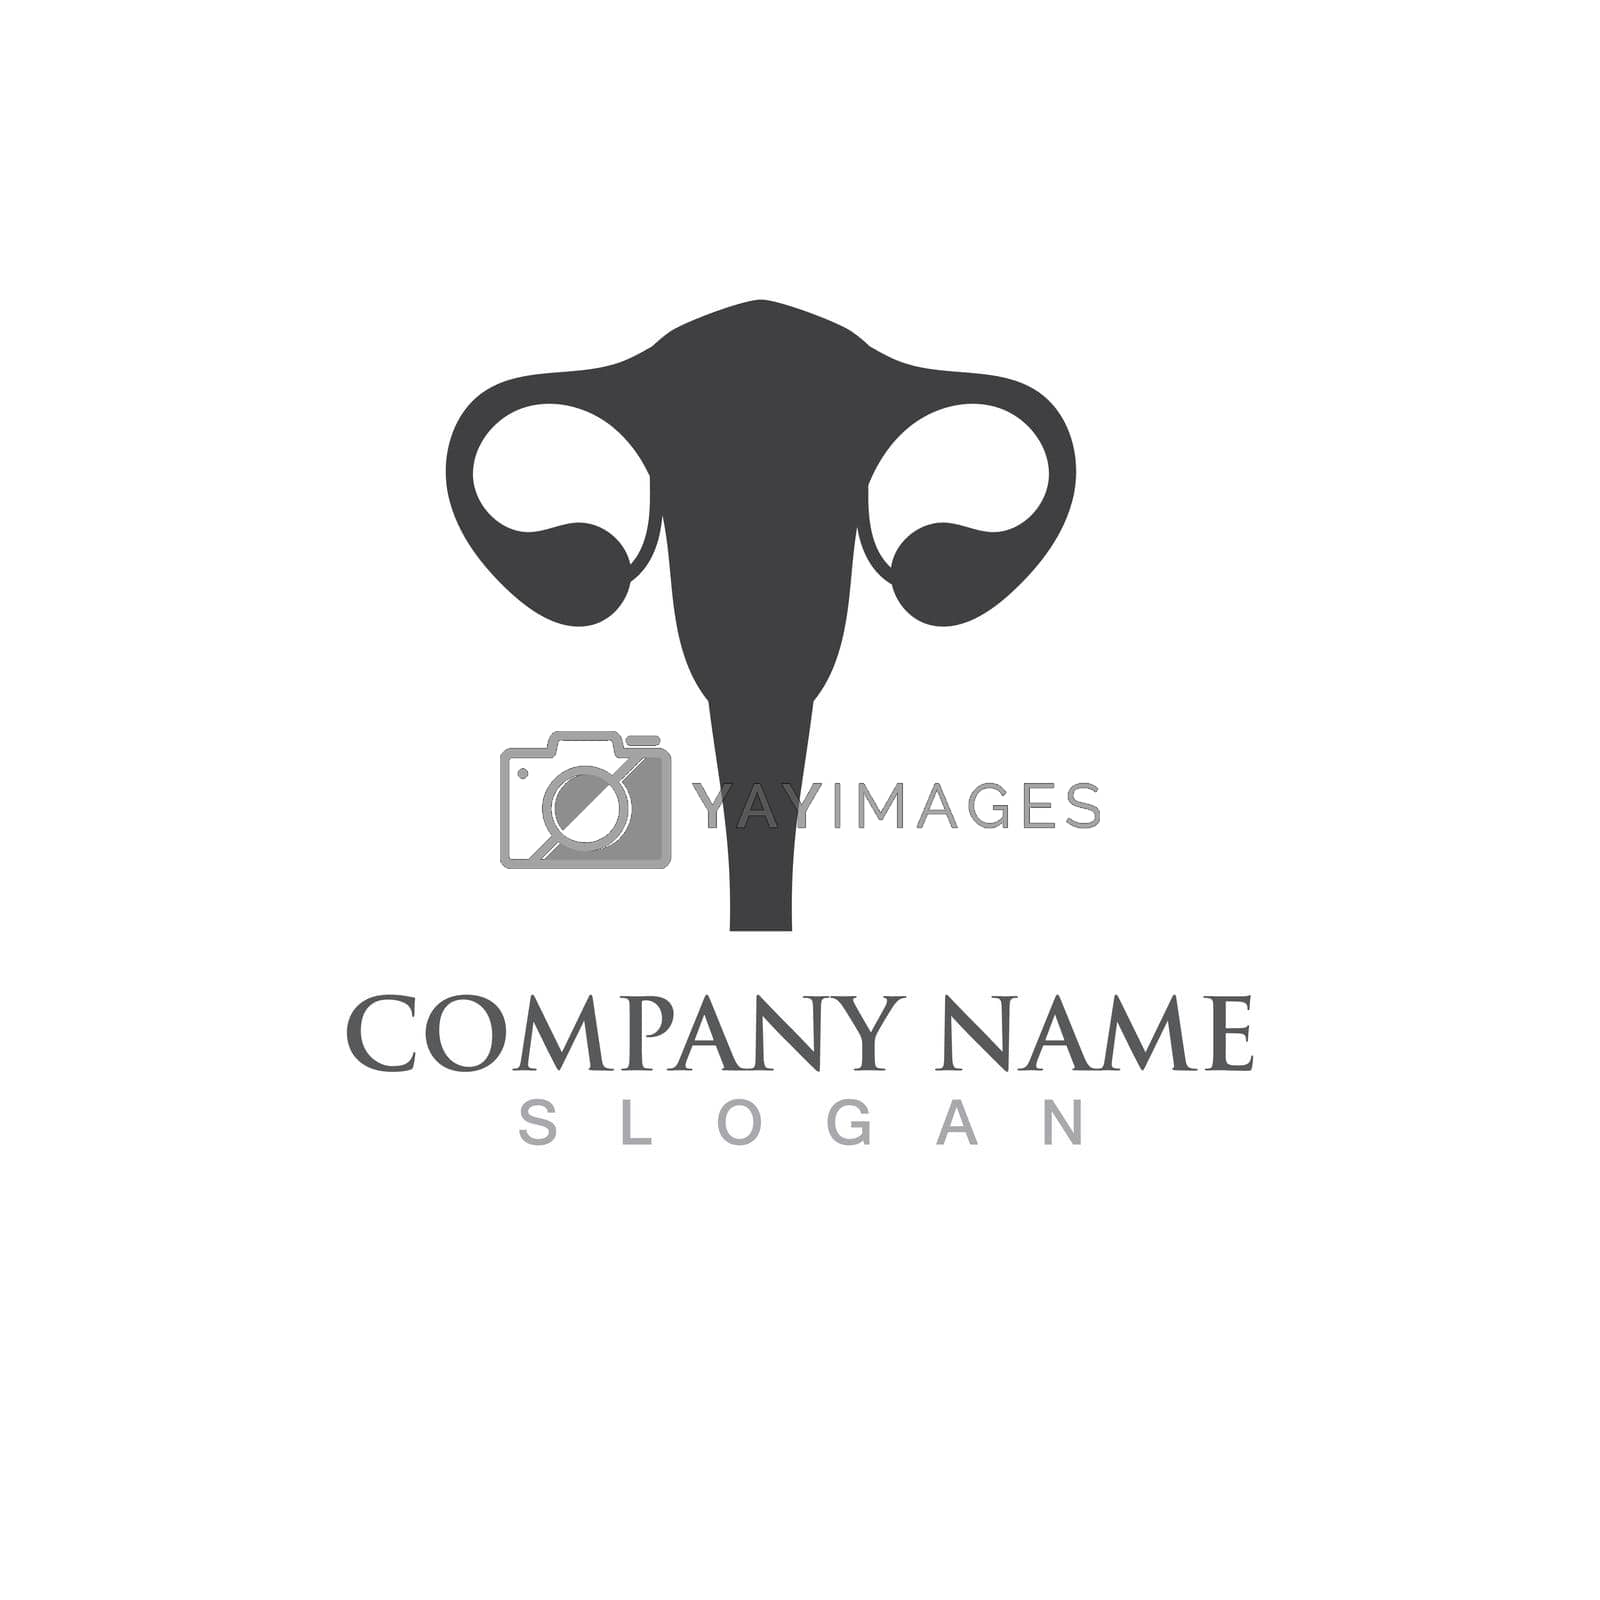 Royalty free image of Woman reproduction icon template by Mrsongrphc